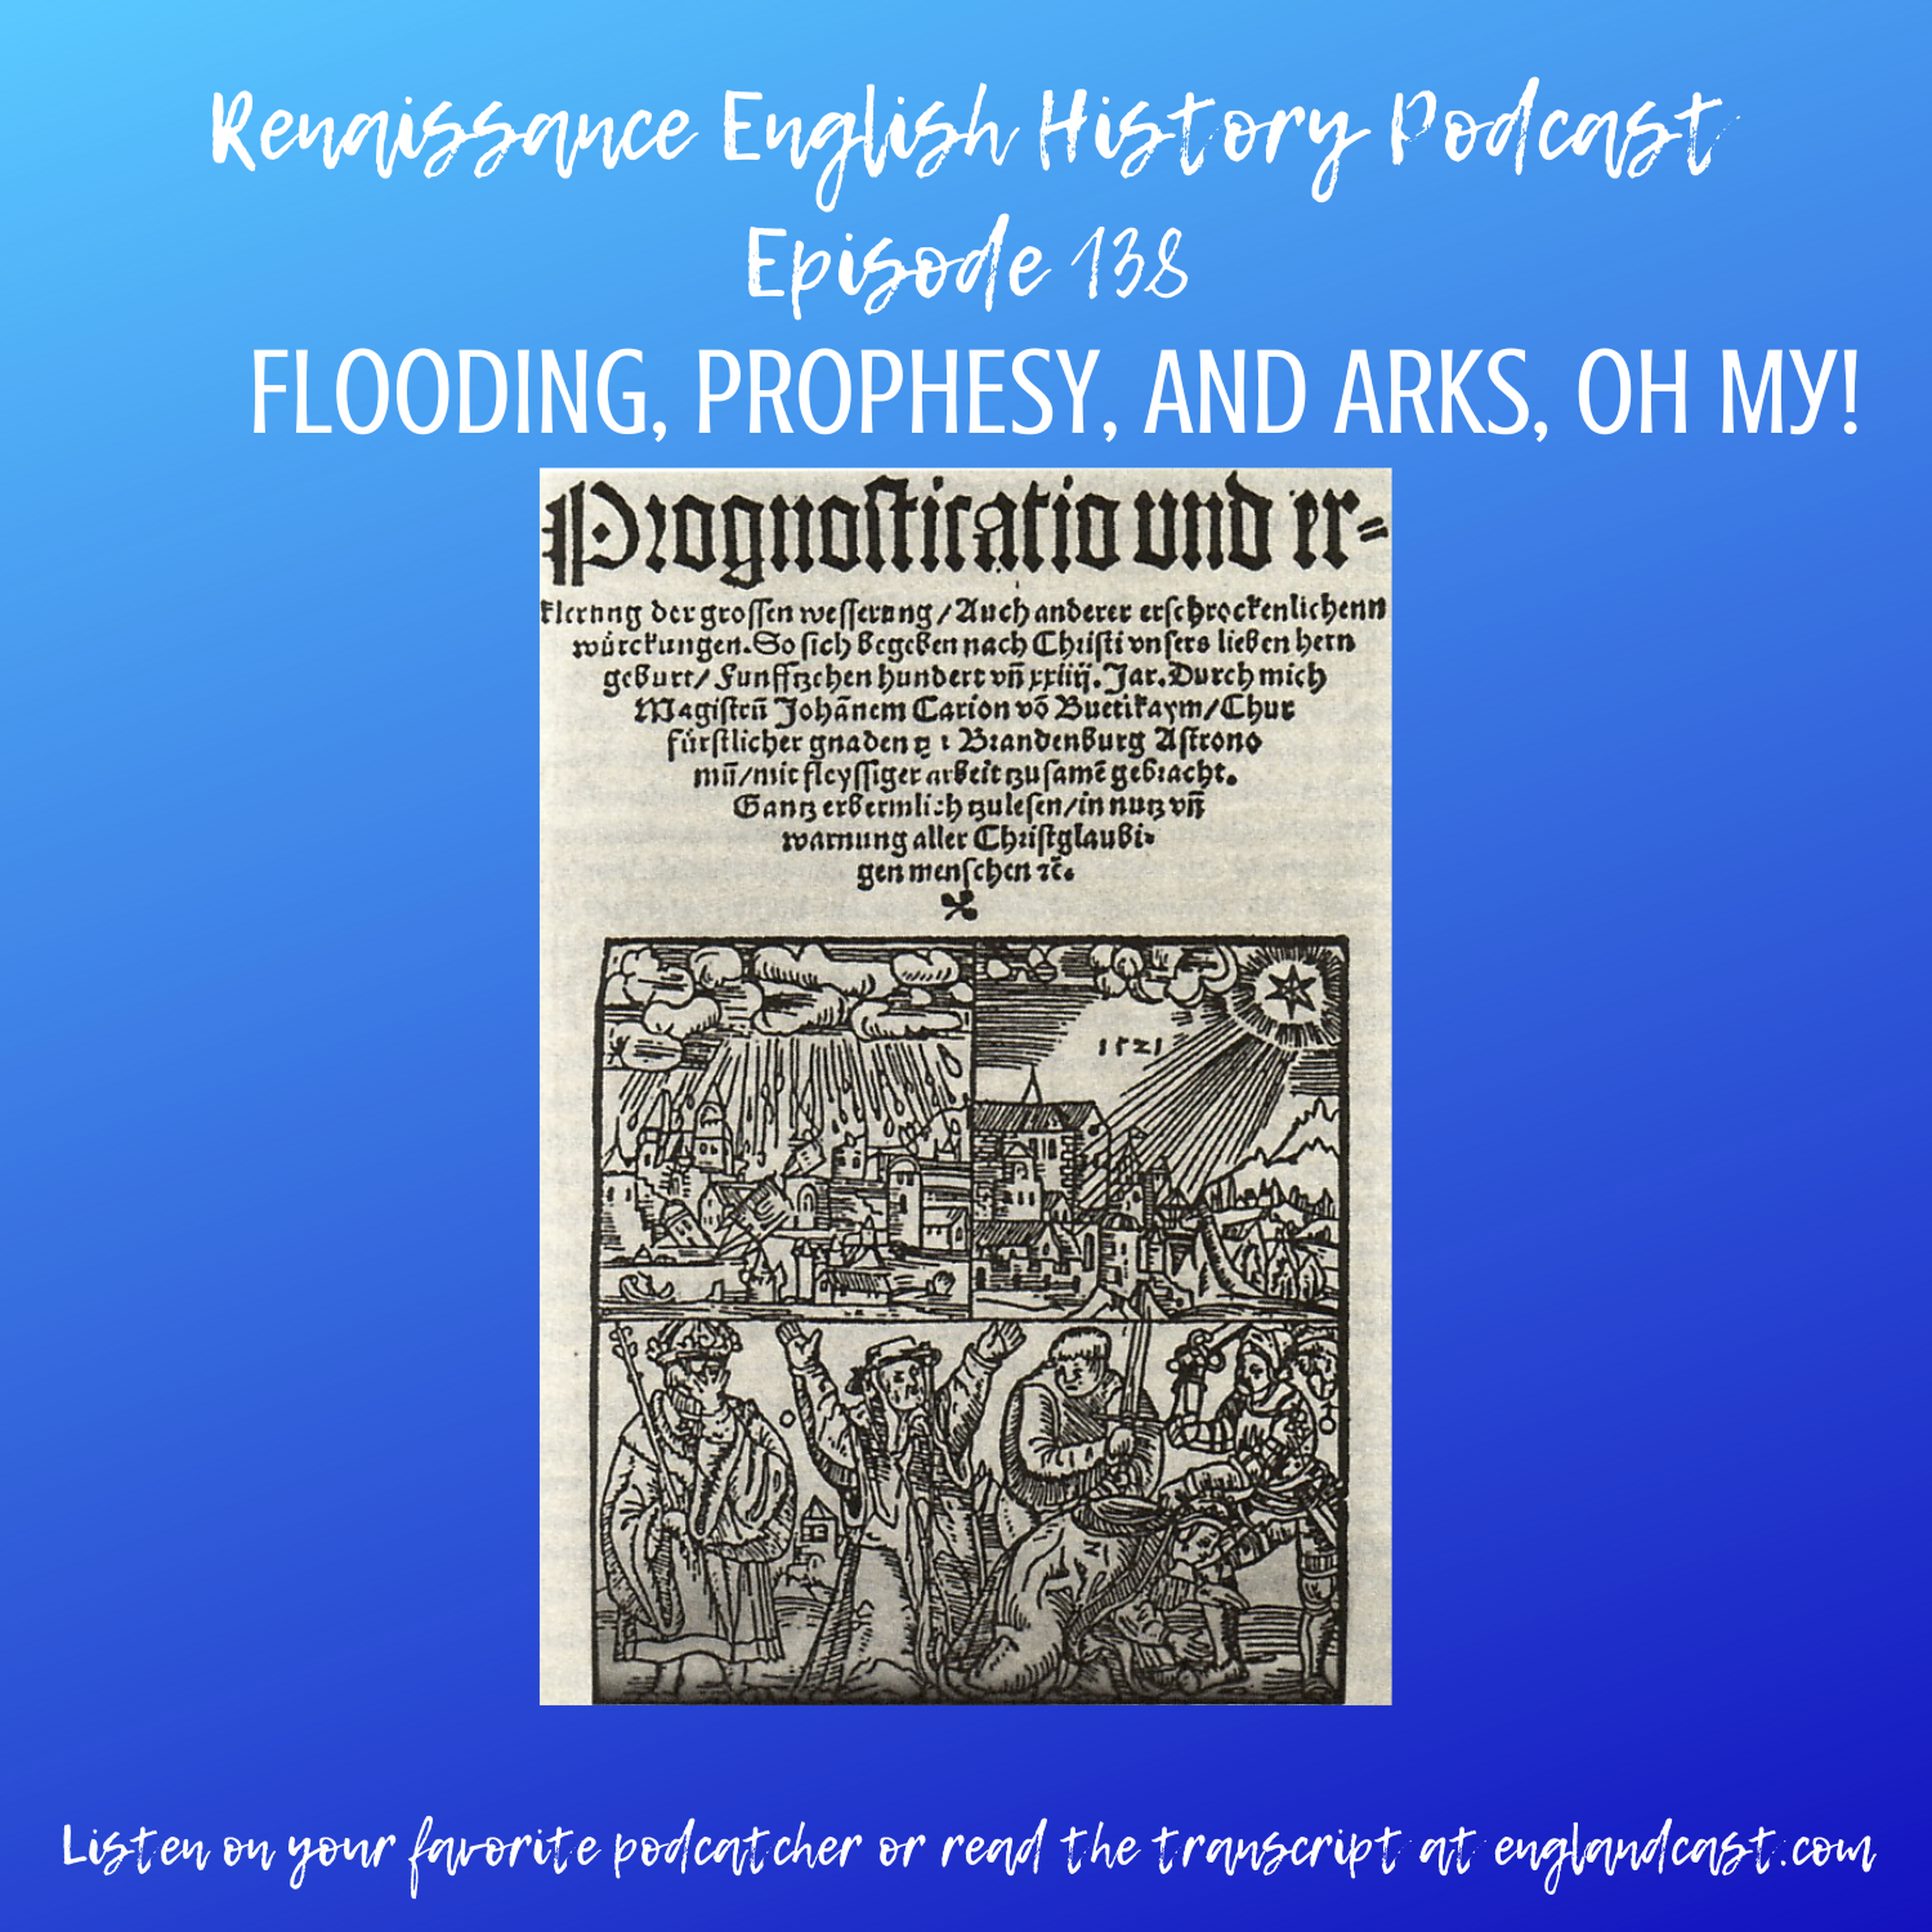 Episode 138: Arks and Floods and Prophesy, Oh My!